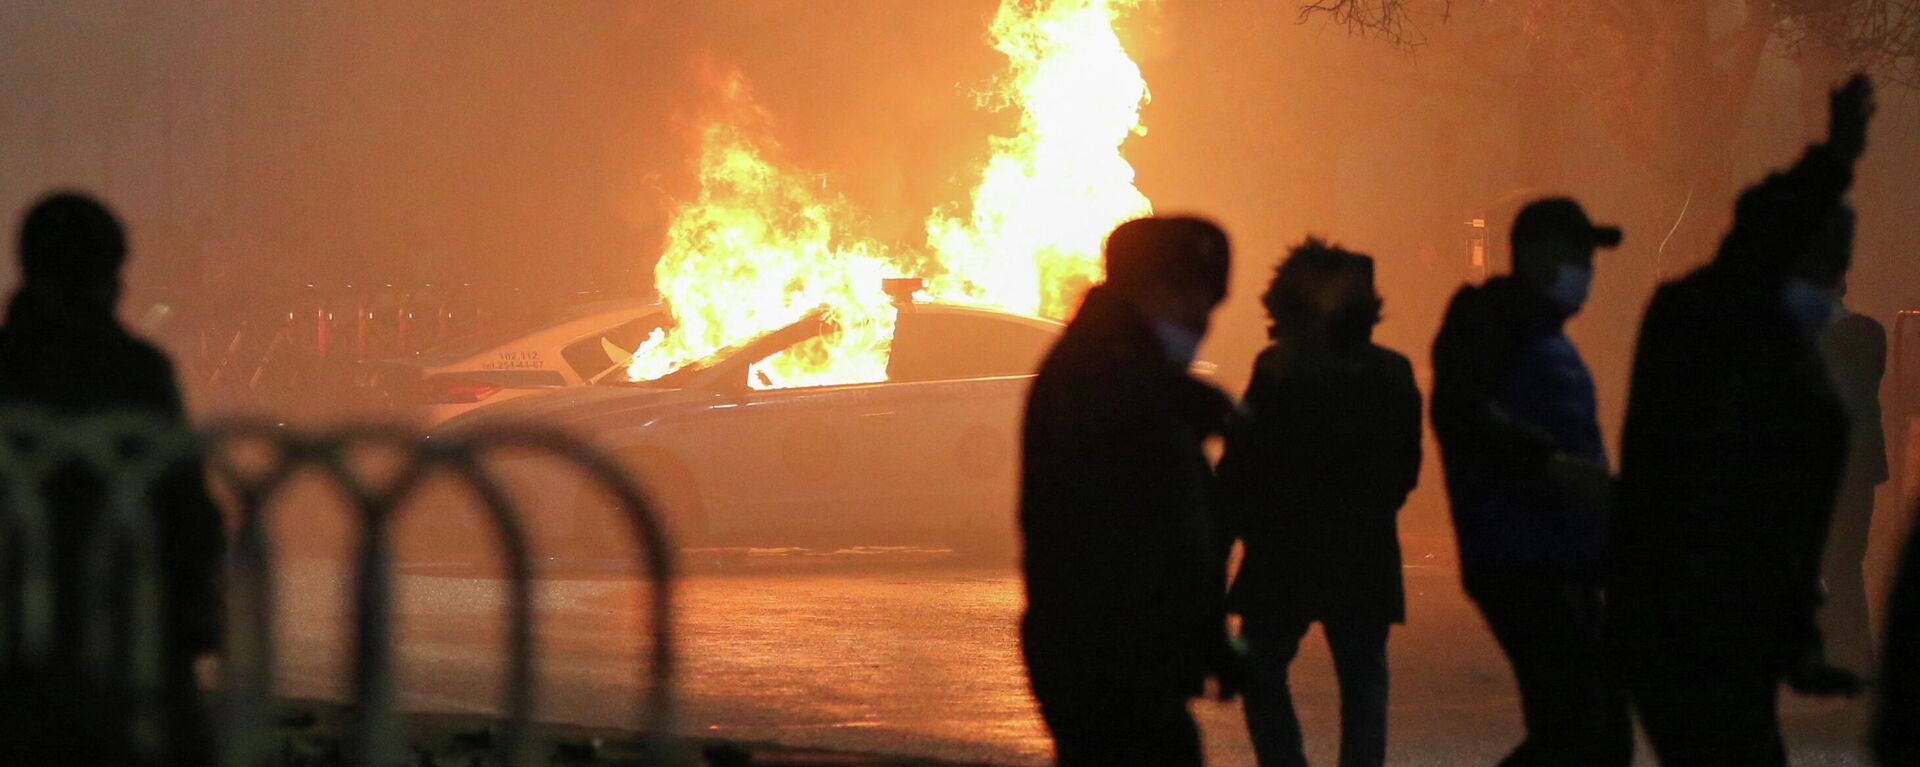 A view shows a burning police car during a protest against LPG cost rise following the Kazakh authorities' decision to lift price caps on liquefied petroleum gas in Almaty, Kazakhstan January 5, 2022 - Sputnik International, 1920, 05.01.2022